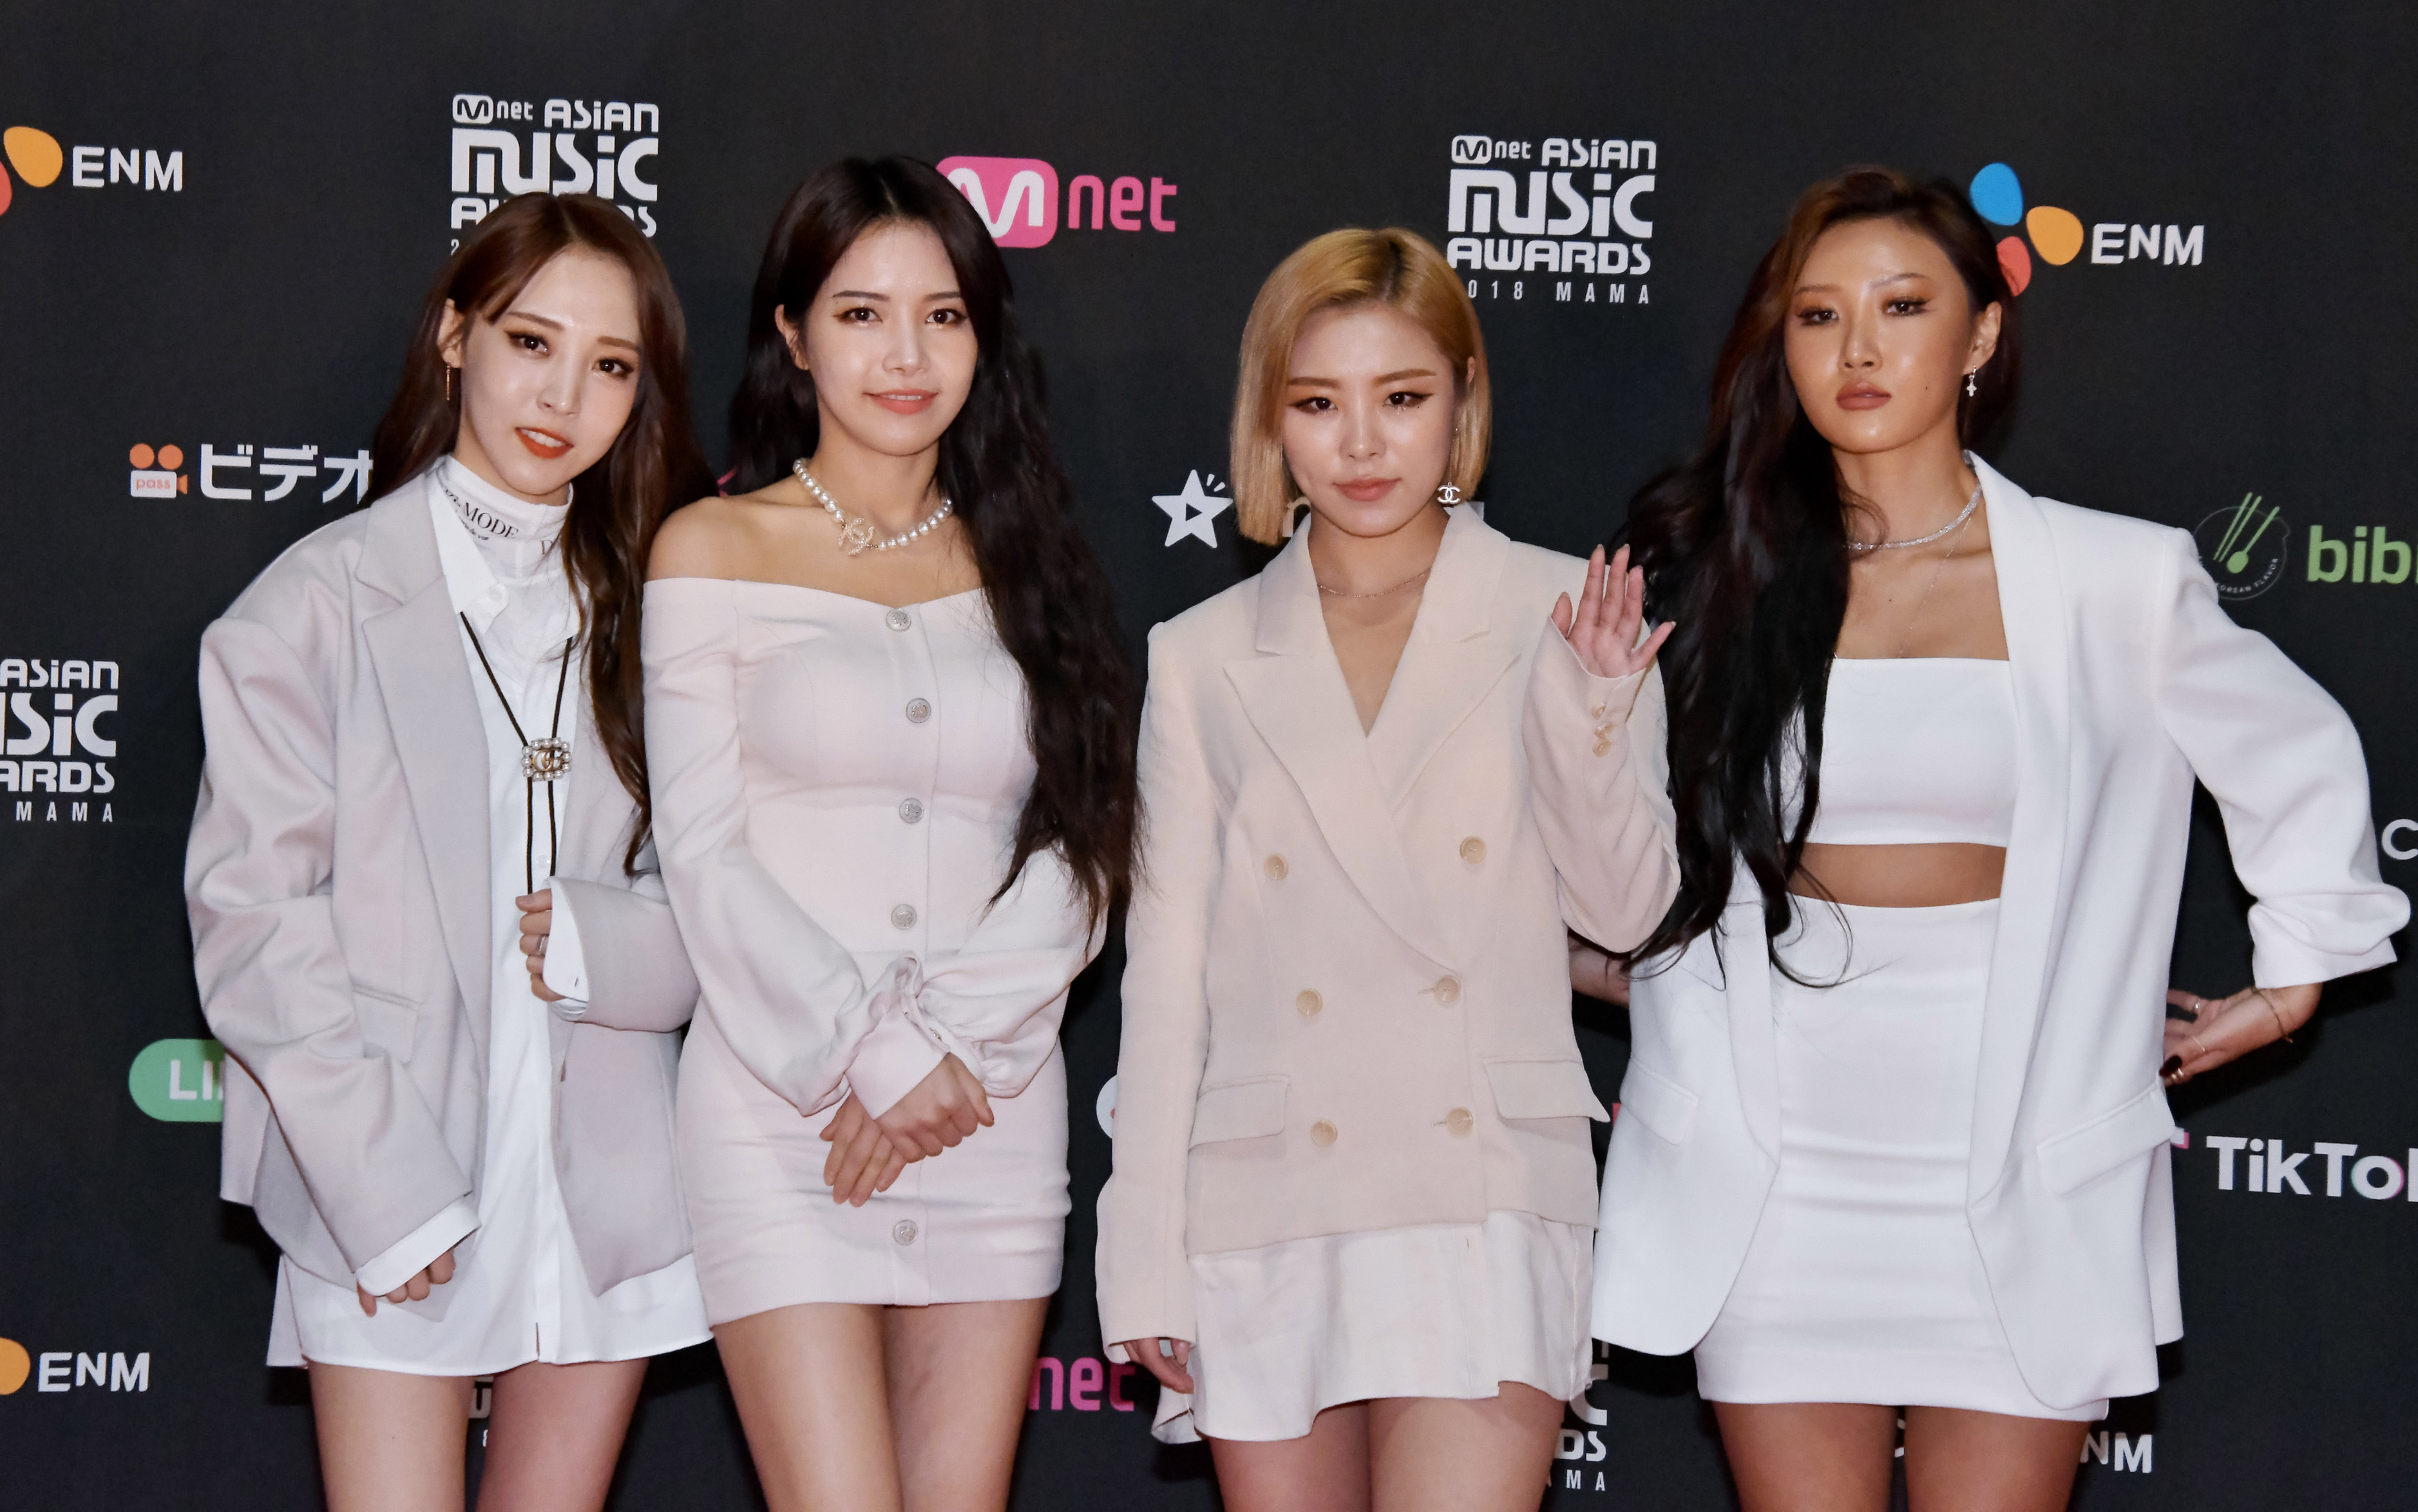 MAMAMOO, Iconic 3rd Gen K-Pop Girl Group: Members, Vocals